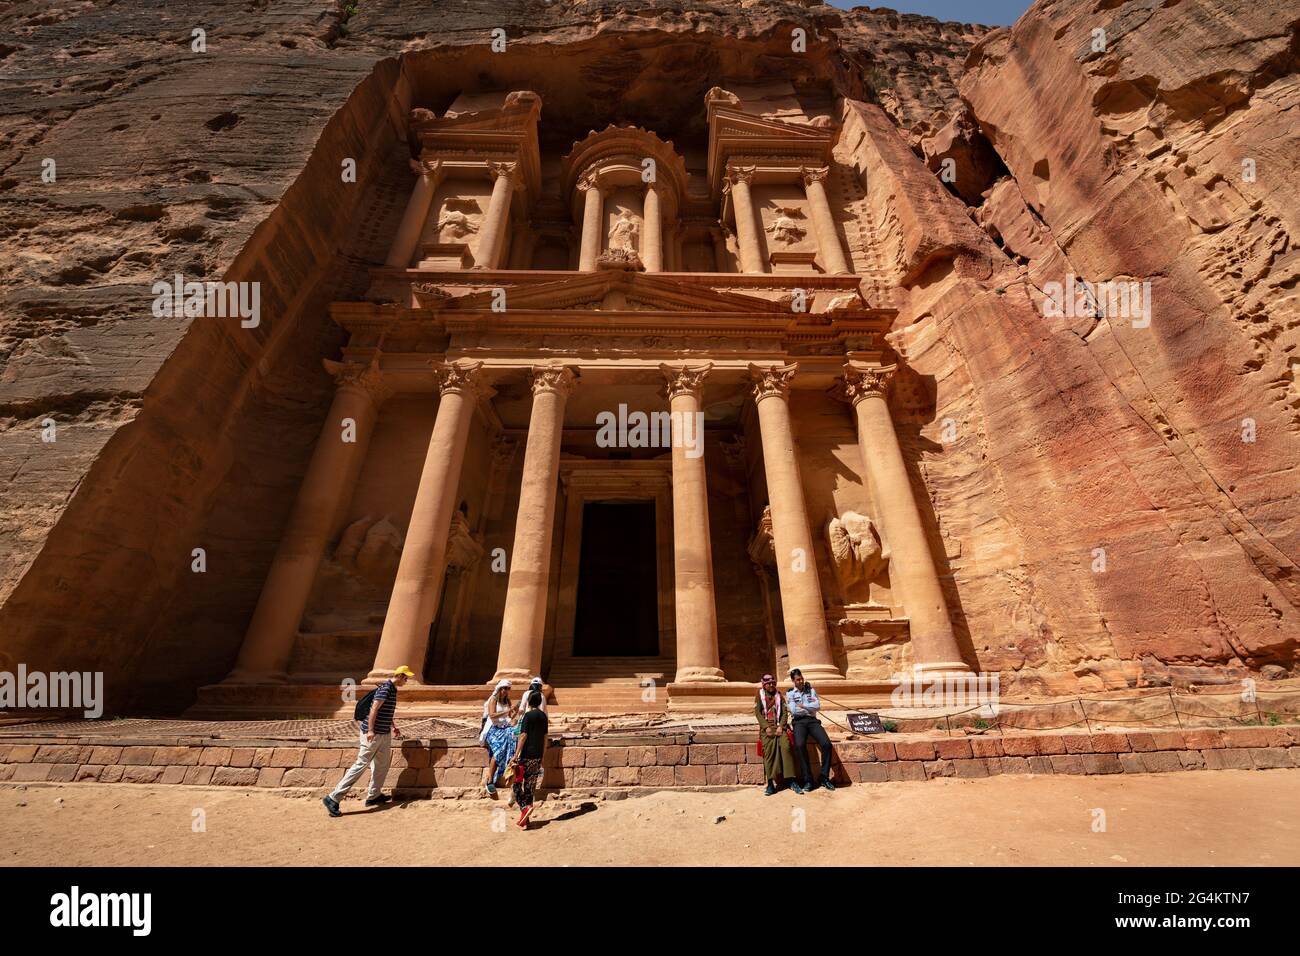 Al-Khazneh "The Treasury" is one of the most elaborate temples in Petra, a city of the Nabatean Kingdom inhabited by the Arabs in ancient times. Stock Photo